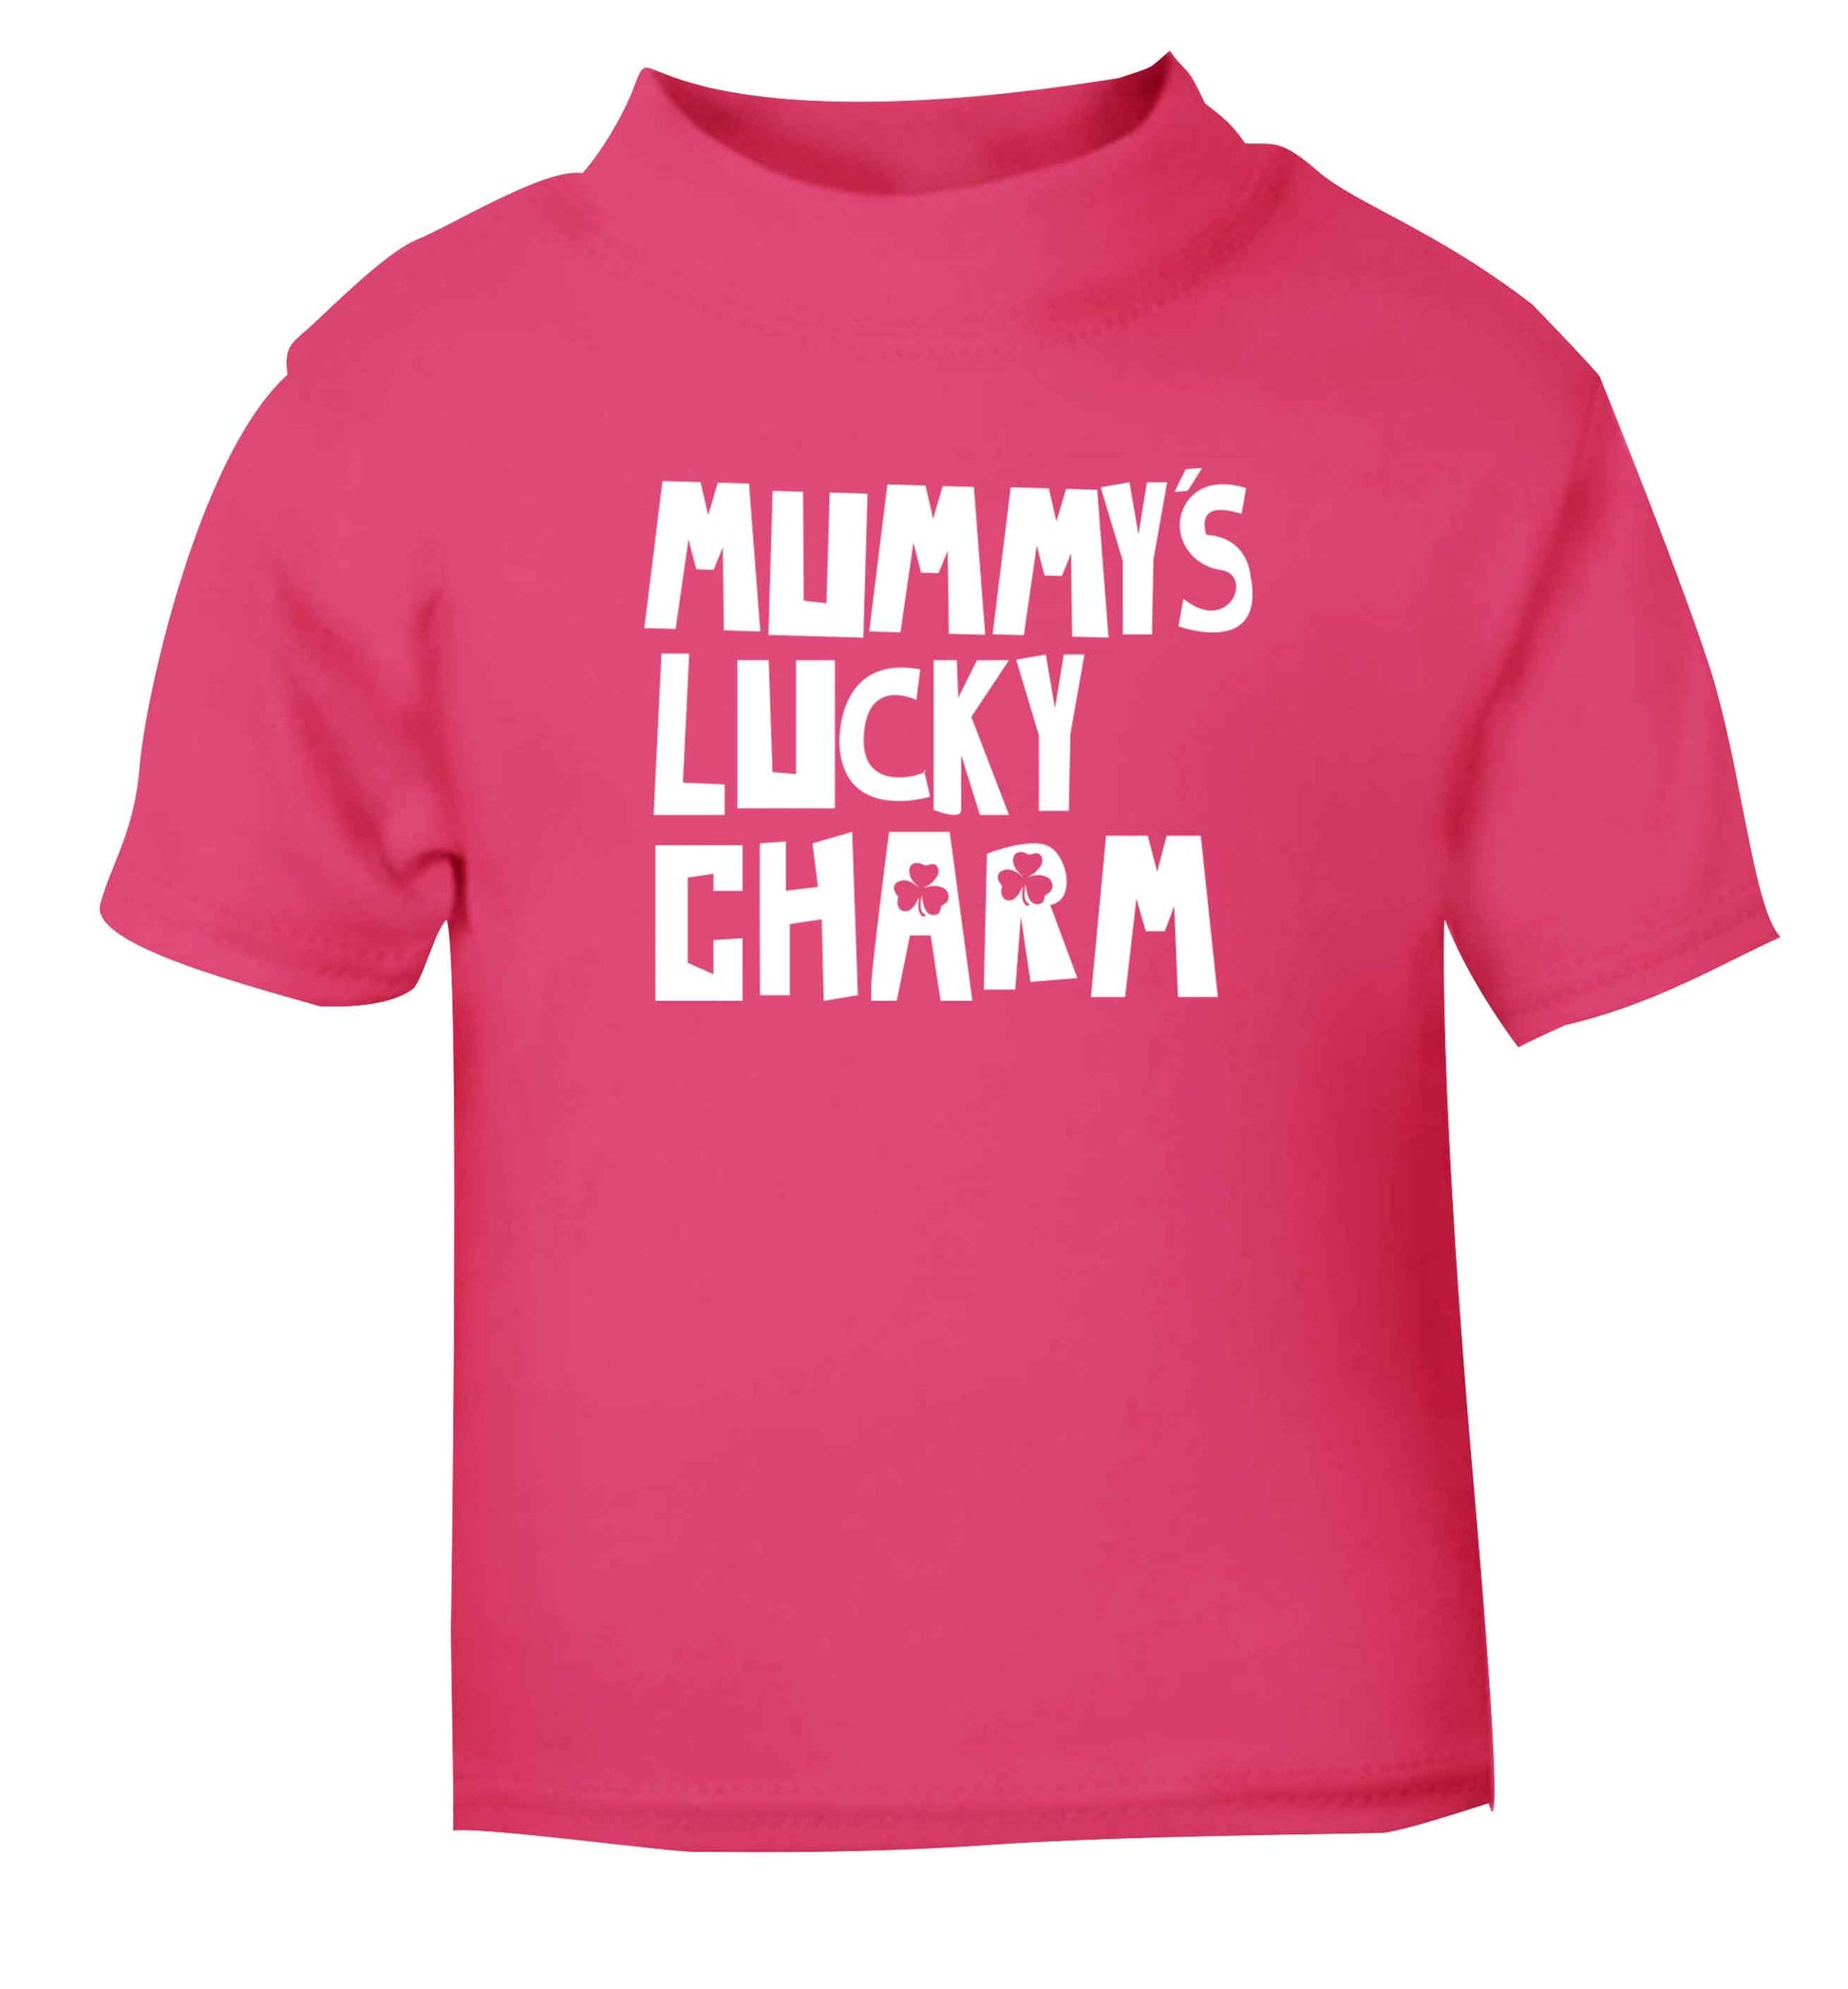 Mummy's lucky charm pink baby toddler Tshirt 2 Years